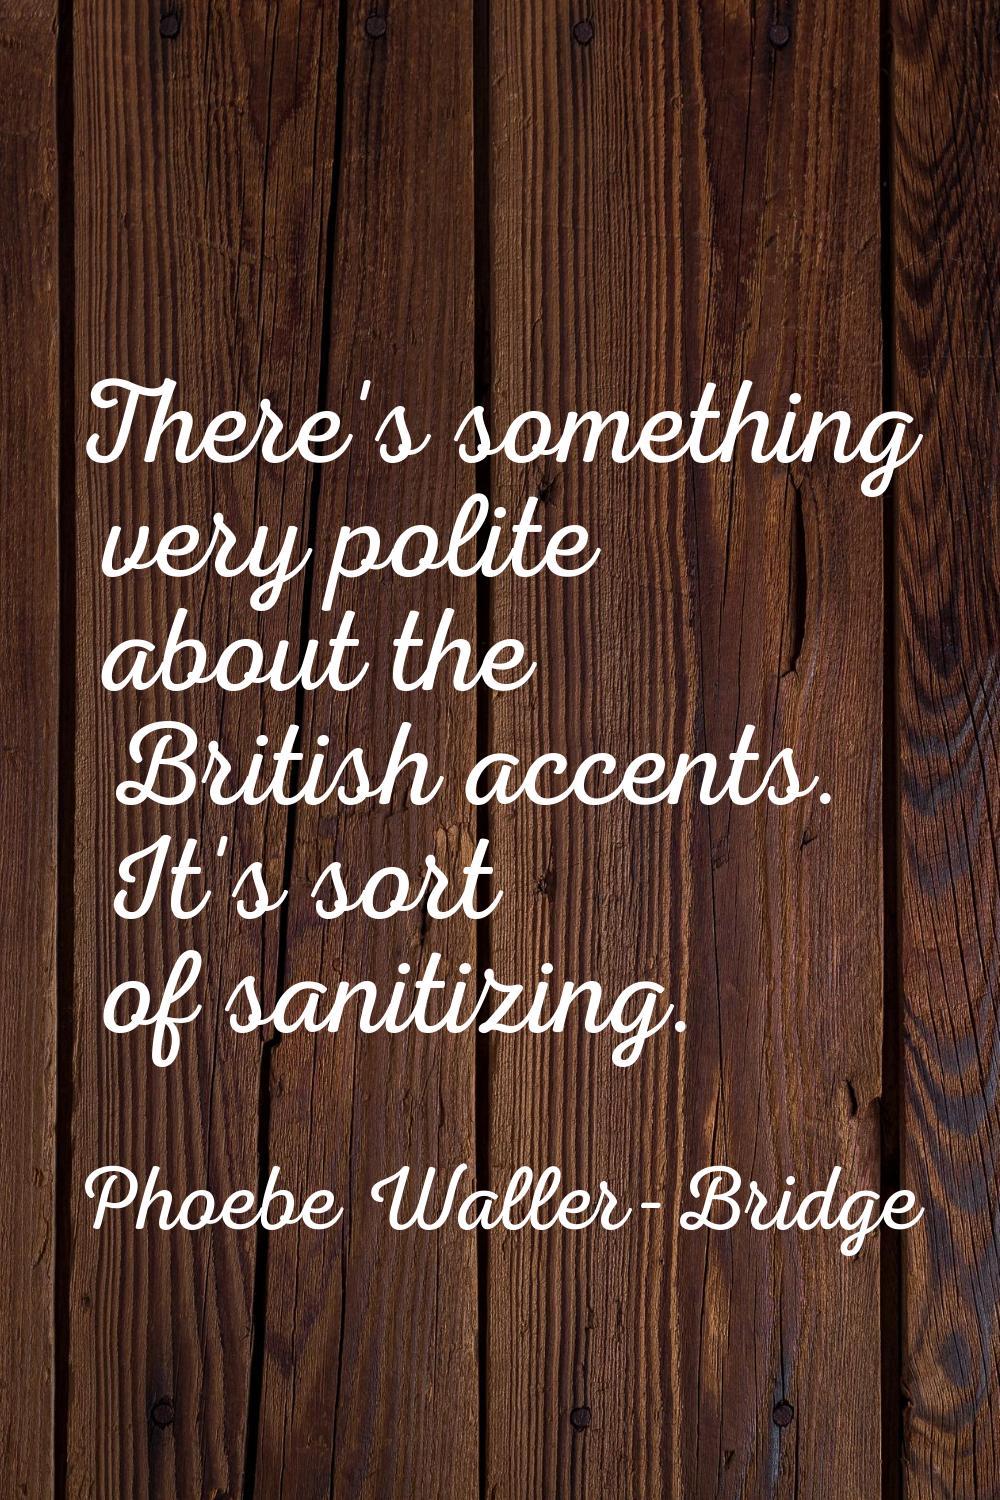 There's something very polite about the British accents. It's sort of sanitizing.